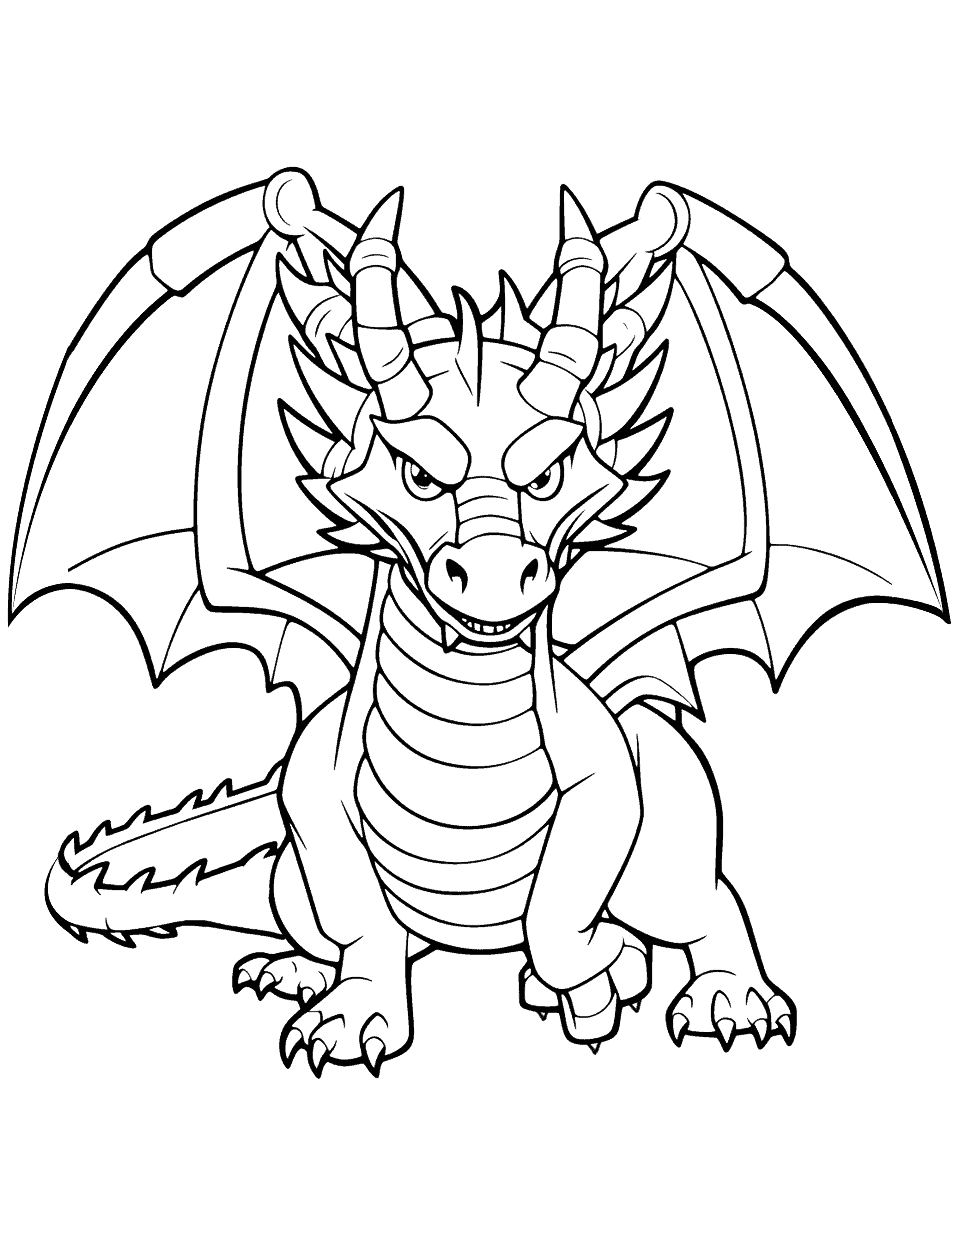 Ninjago Dragon Coloring Page - The dragon from Ninjago, ready to engage in a fierce aerial battle.